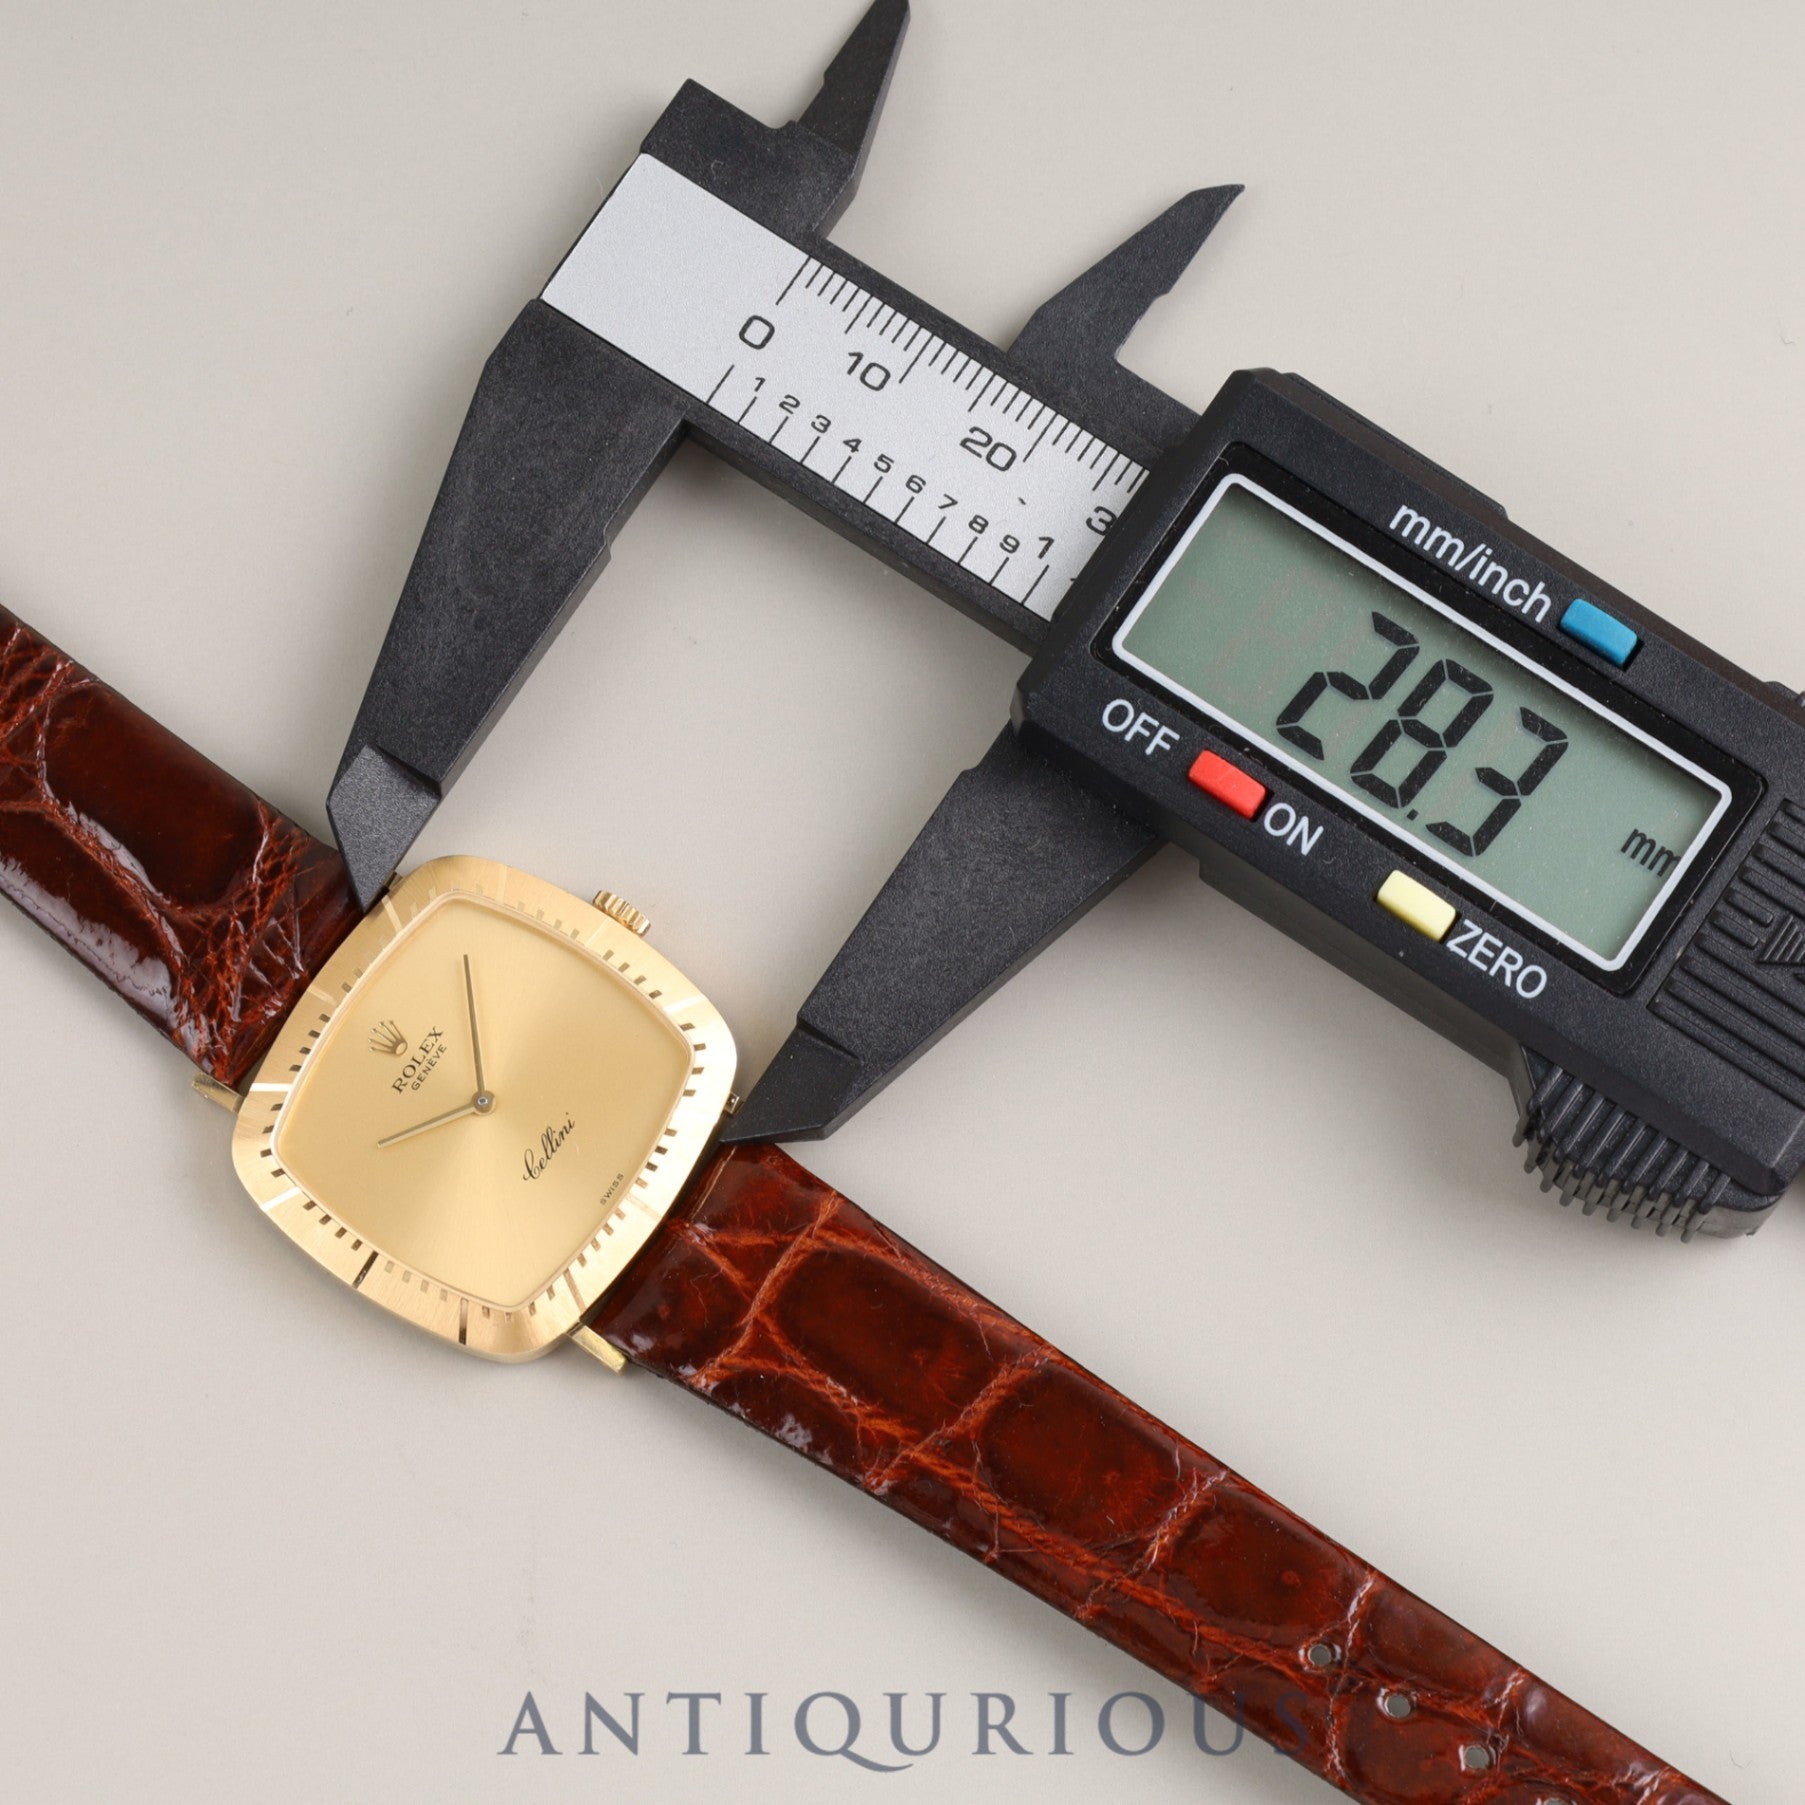 ROLEX CELLINI 4084 Manual winding Cal.1601 18KYG Leather Genuine buckle Gold dial L serial number (1990) Warranty (1990)